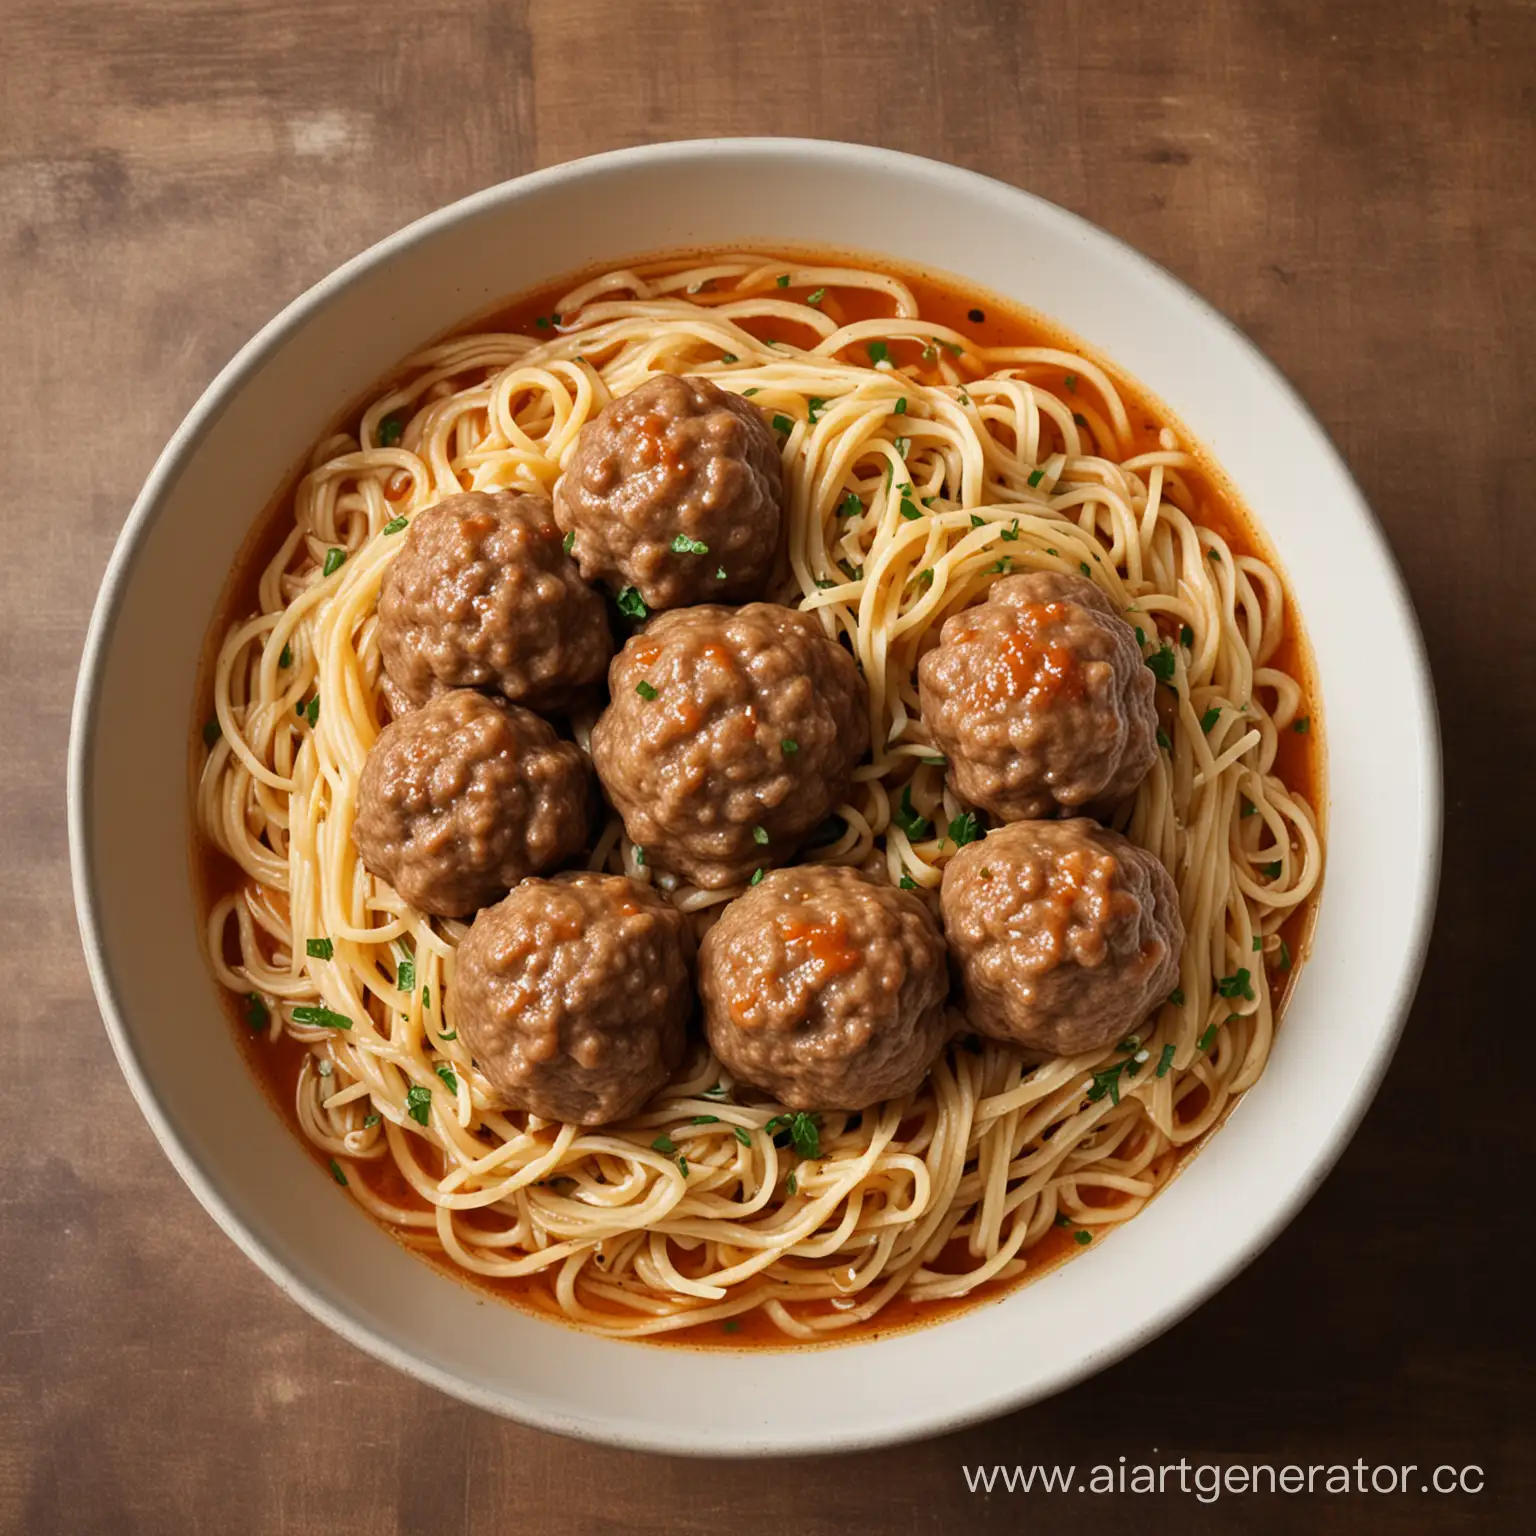 Hearty-Meatball-Noodle-Dish-in-Deep-Bowl